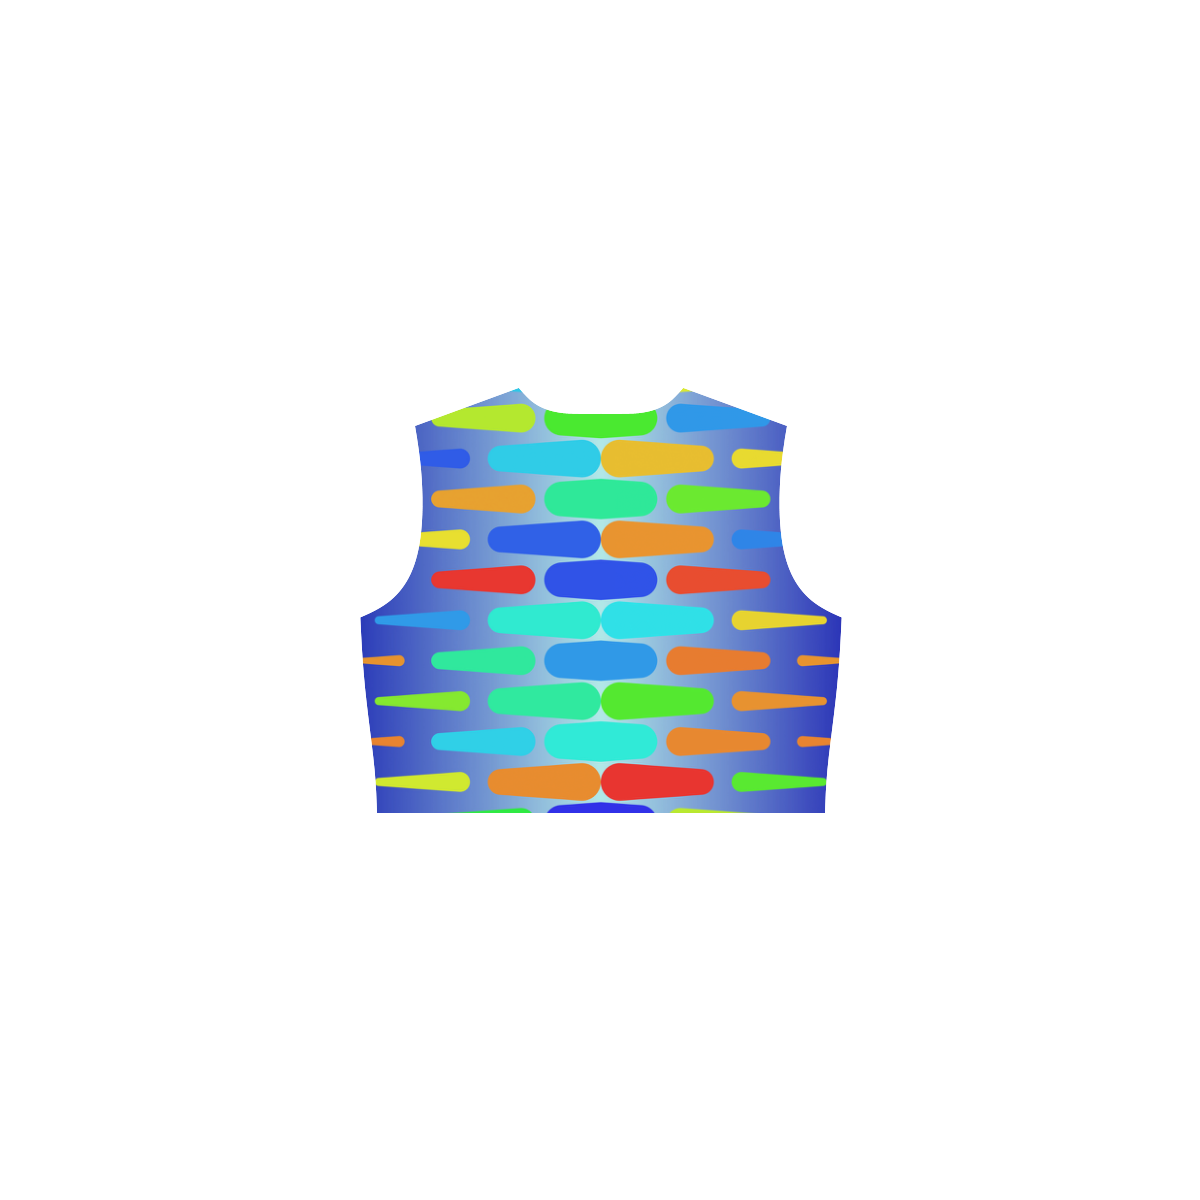 Colorful shapes on a blue background Eos Women's Sleeveless Dress (Model D01)